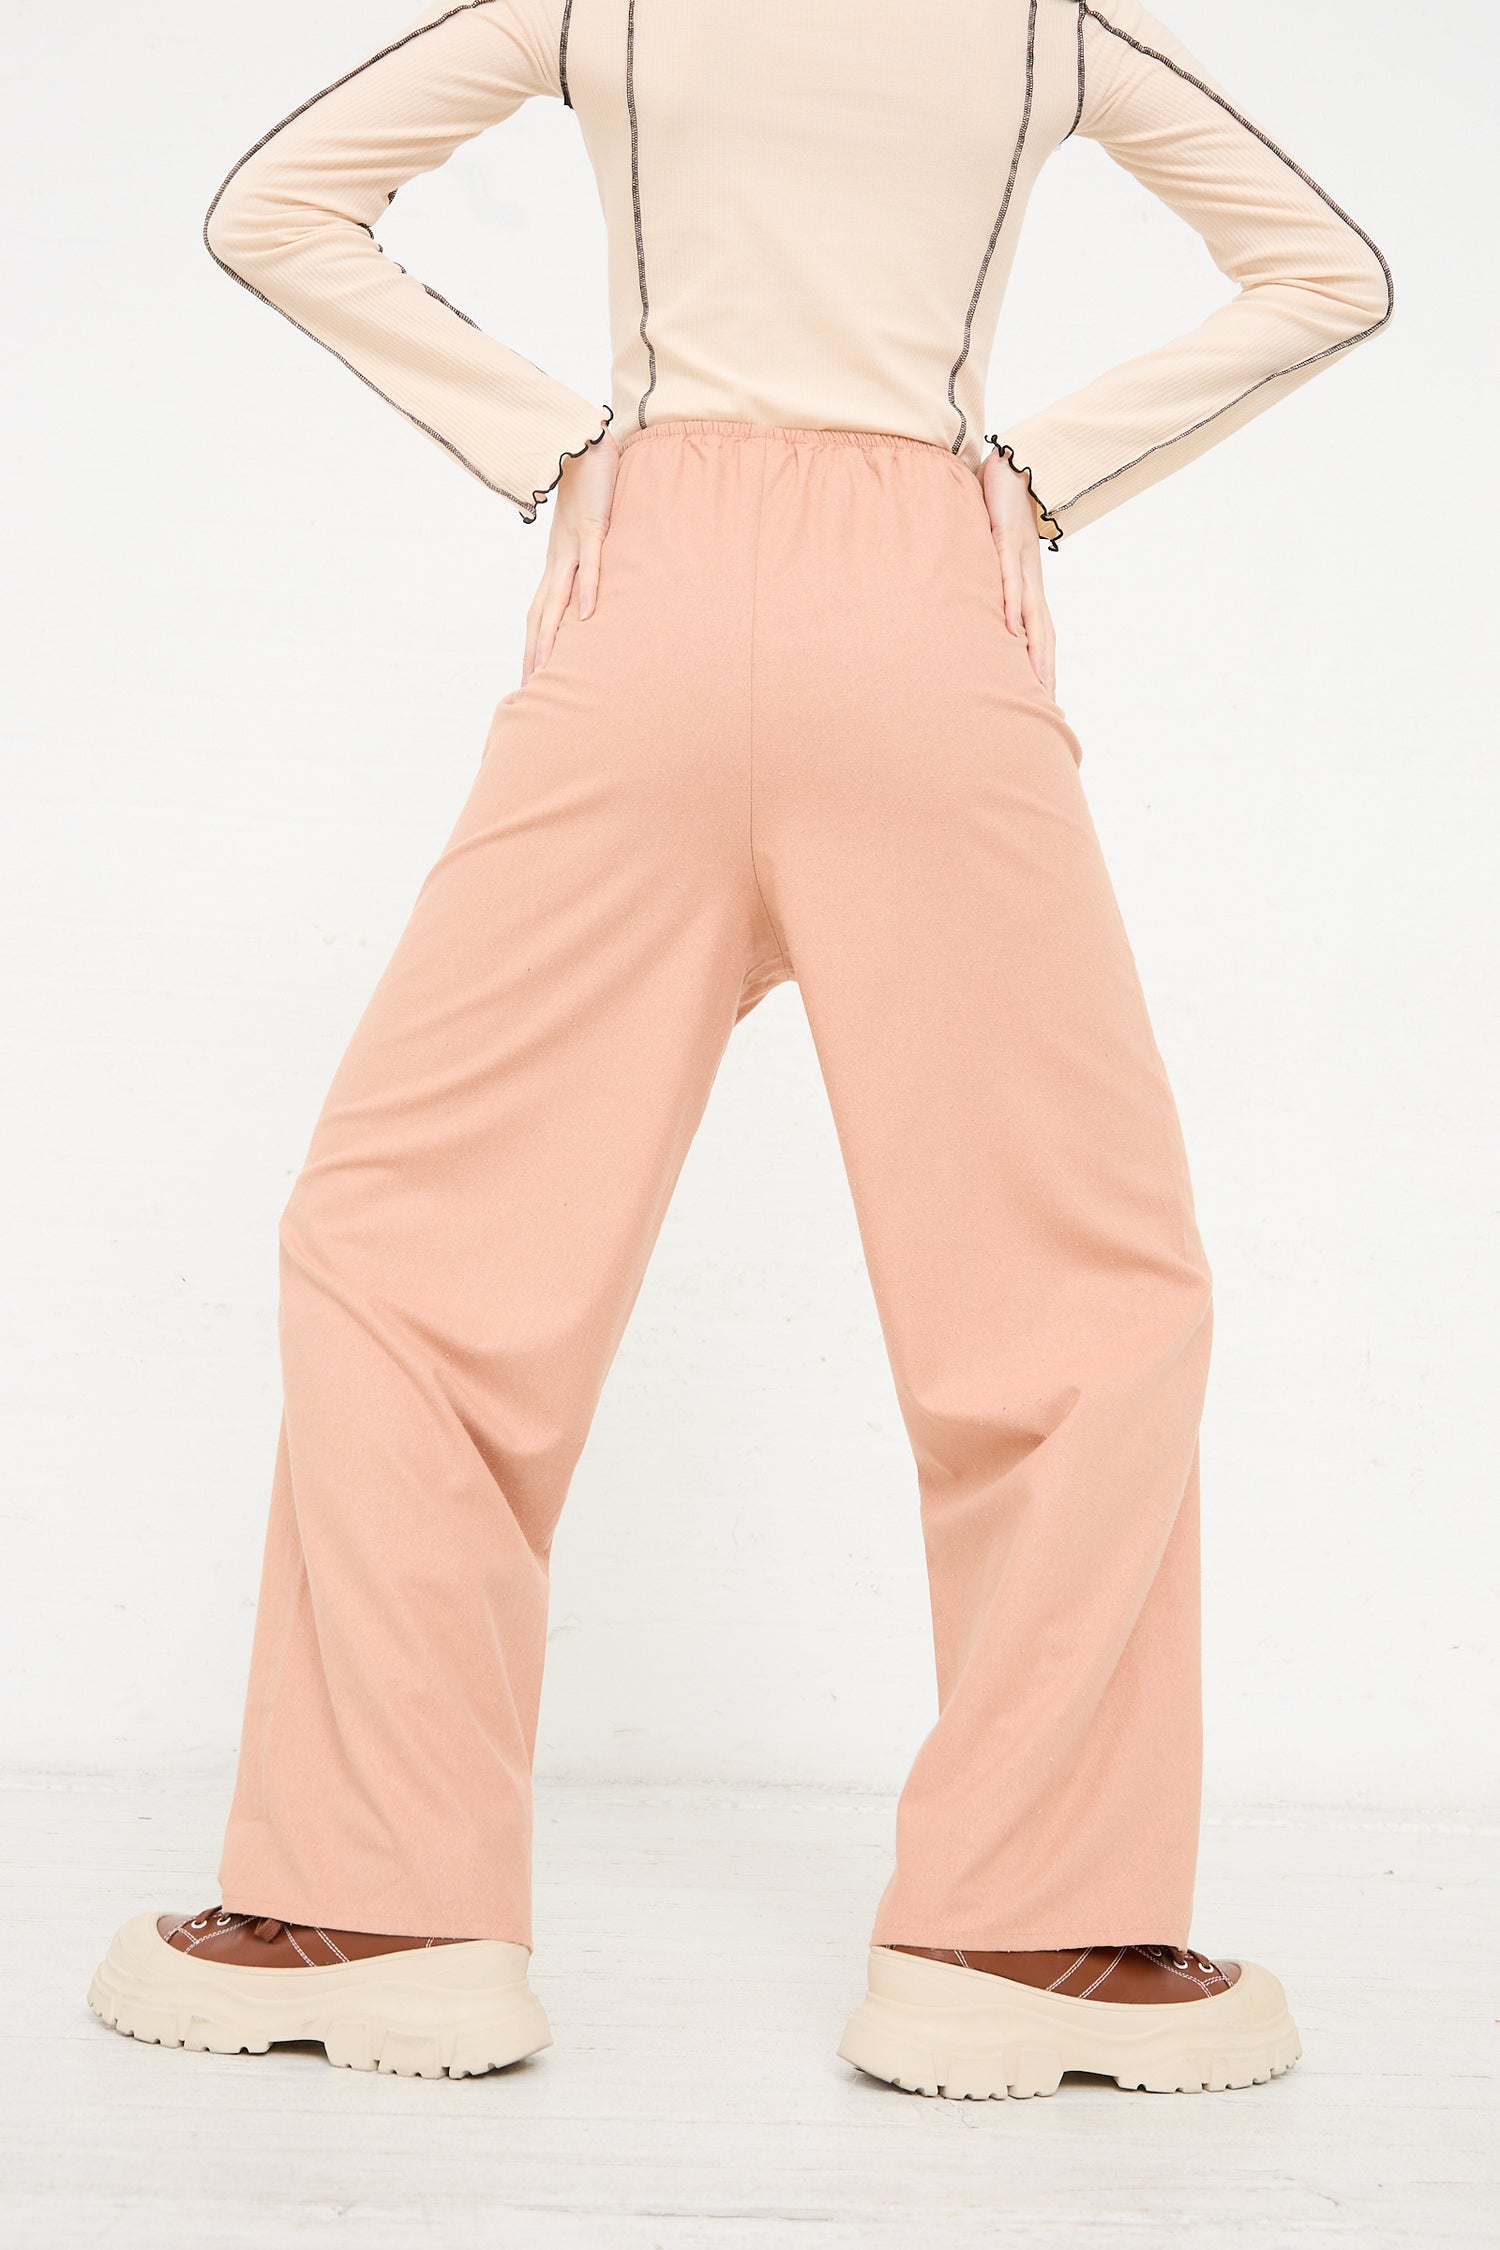 A person standing with hands on hips wearing the Wild Silk Stoa Pant in Sid Pink by Baserange and a beige top with chunky beige shoes, viewed from the back.